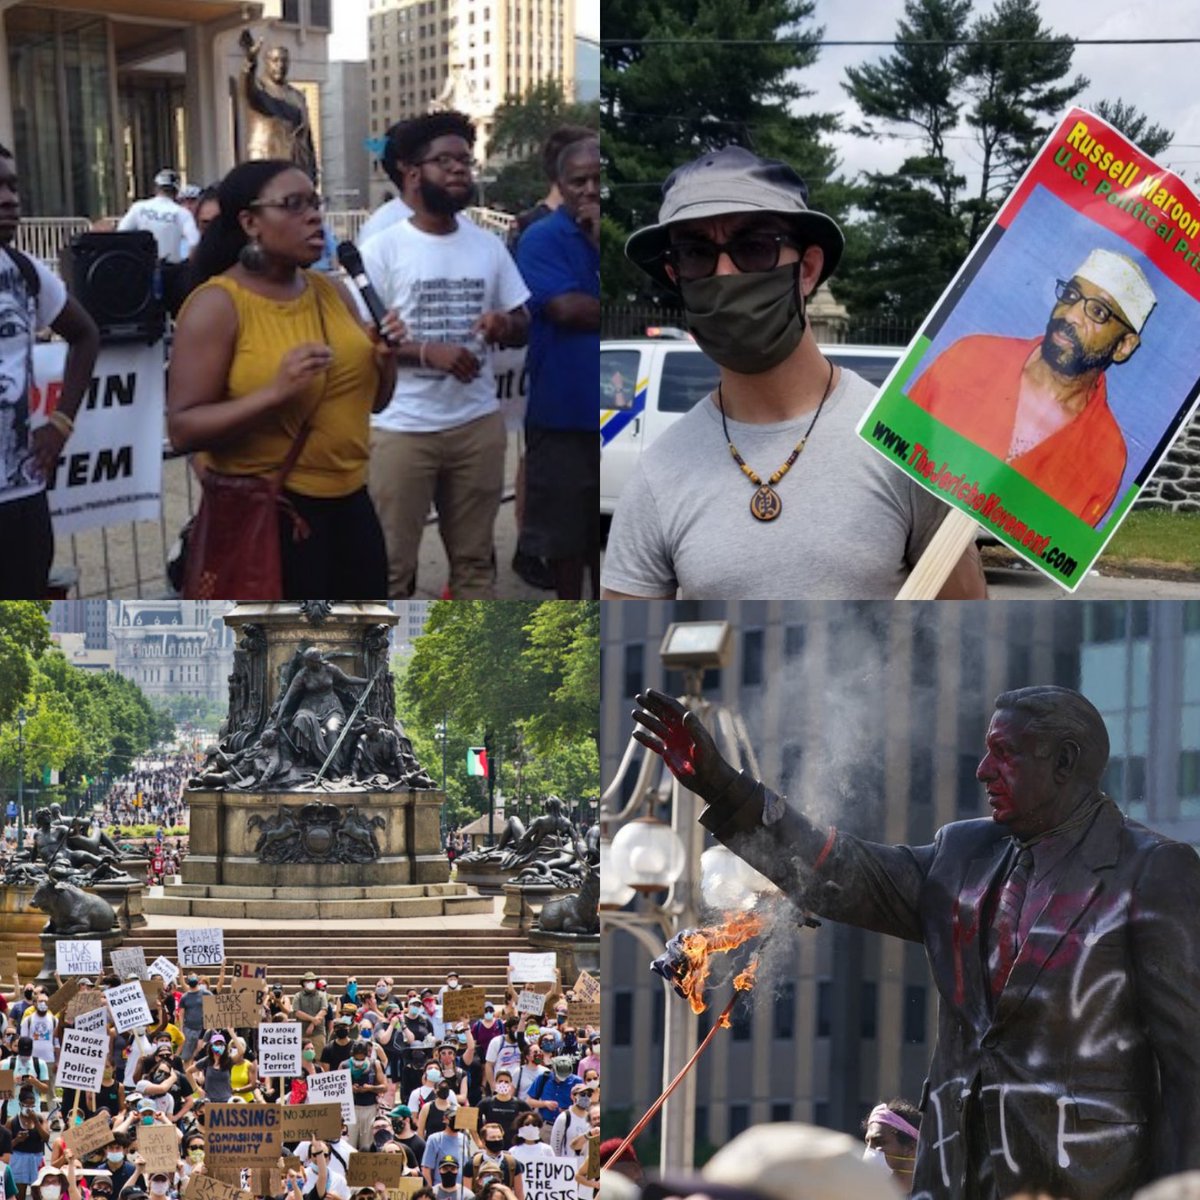 Our conversation w/ Philly Black Radical Collective members  @stillbrave29 &  @saleemholbrook showed how Philly organizers have developed a local abolitionist vision in the wake of this summer's state violence & rebellions. One that remains as urgent as ever …https://millennialsarekillingcapitalism.libsyn.com/we-want-freedom-abolition-in-philly-and-beyond-with-robert-saleem-holbrook-and-megan-malachi